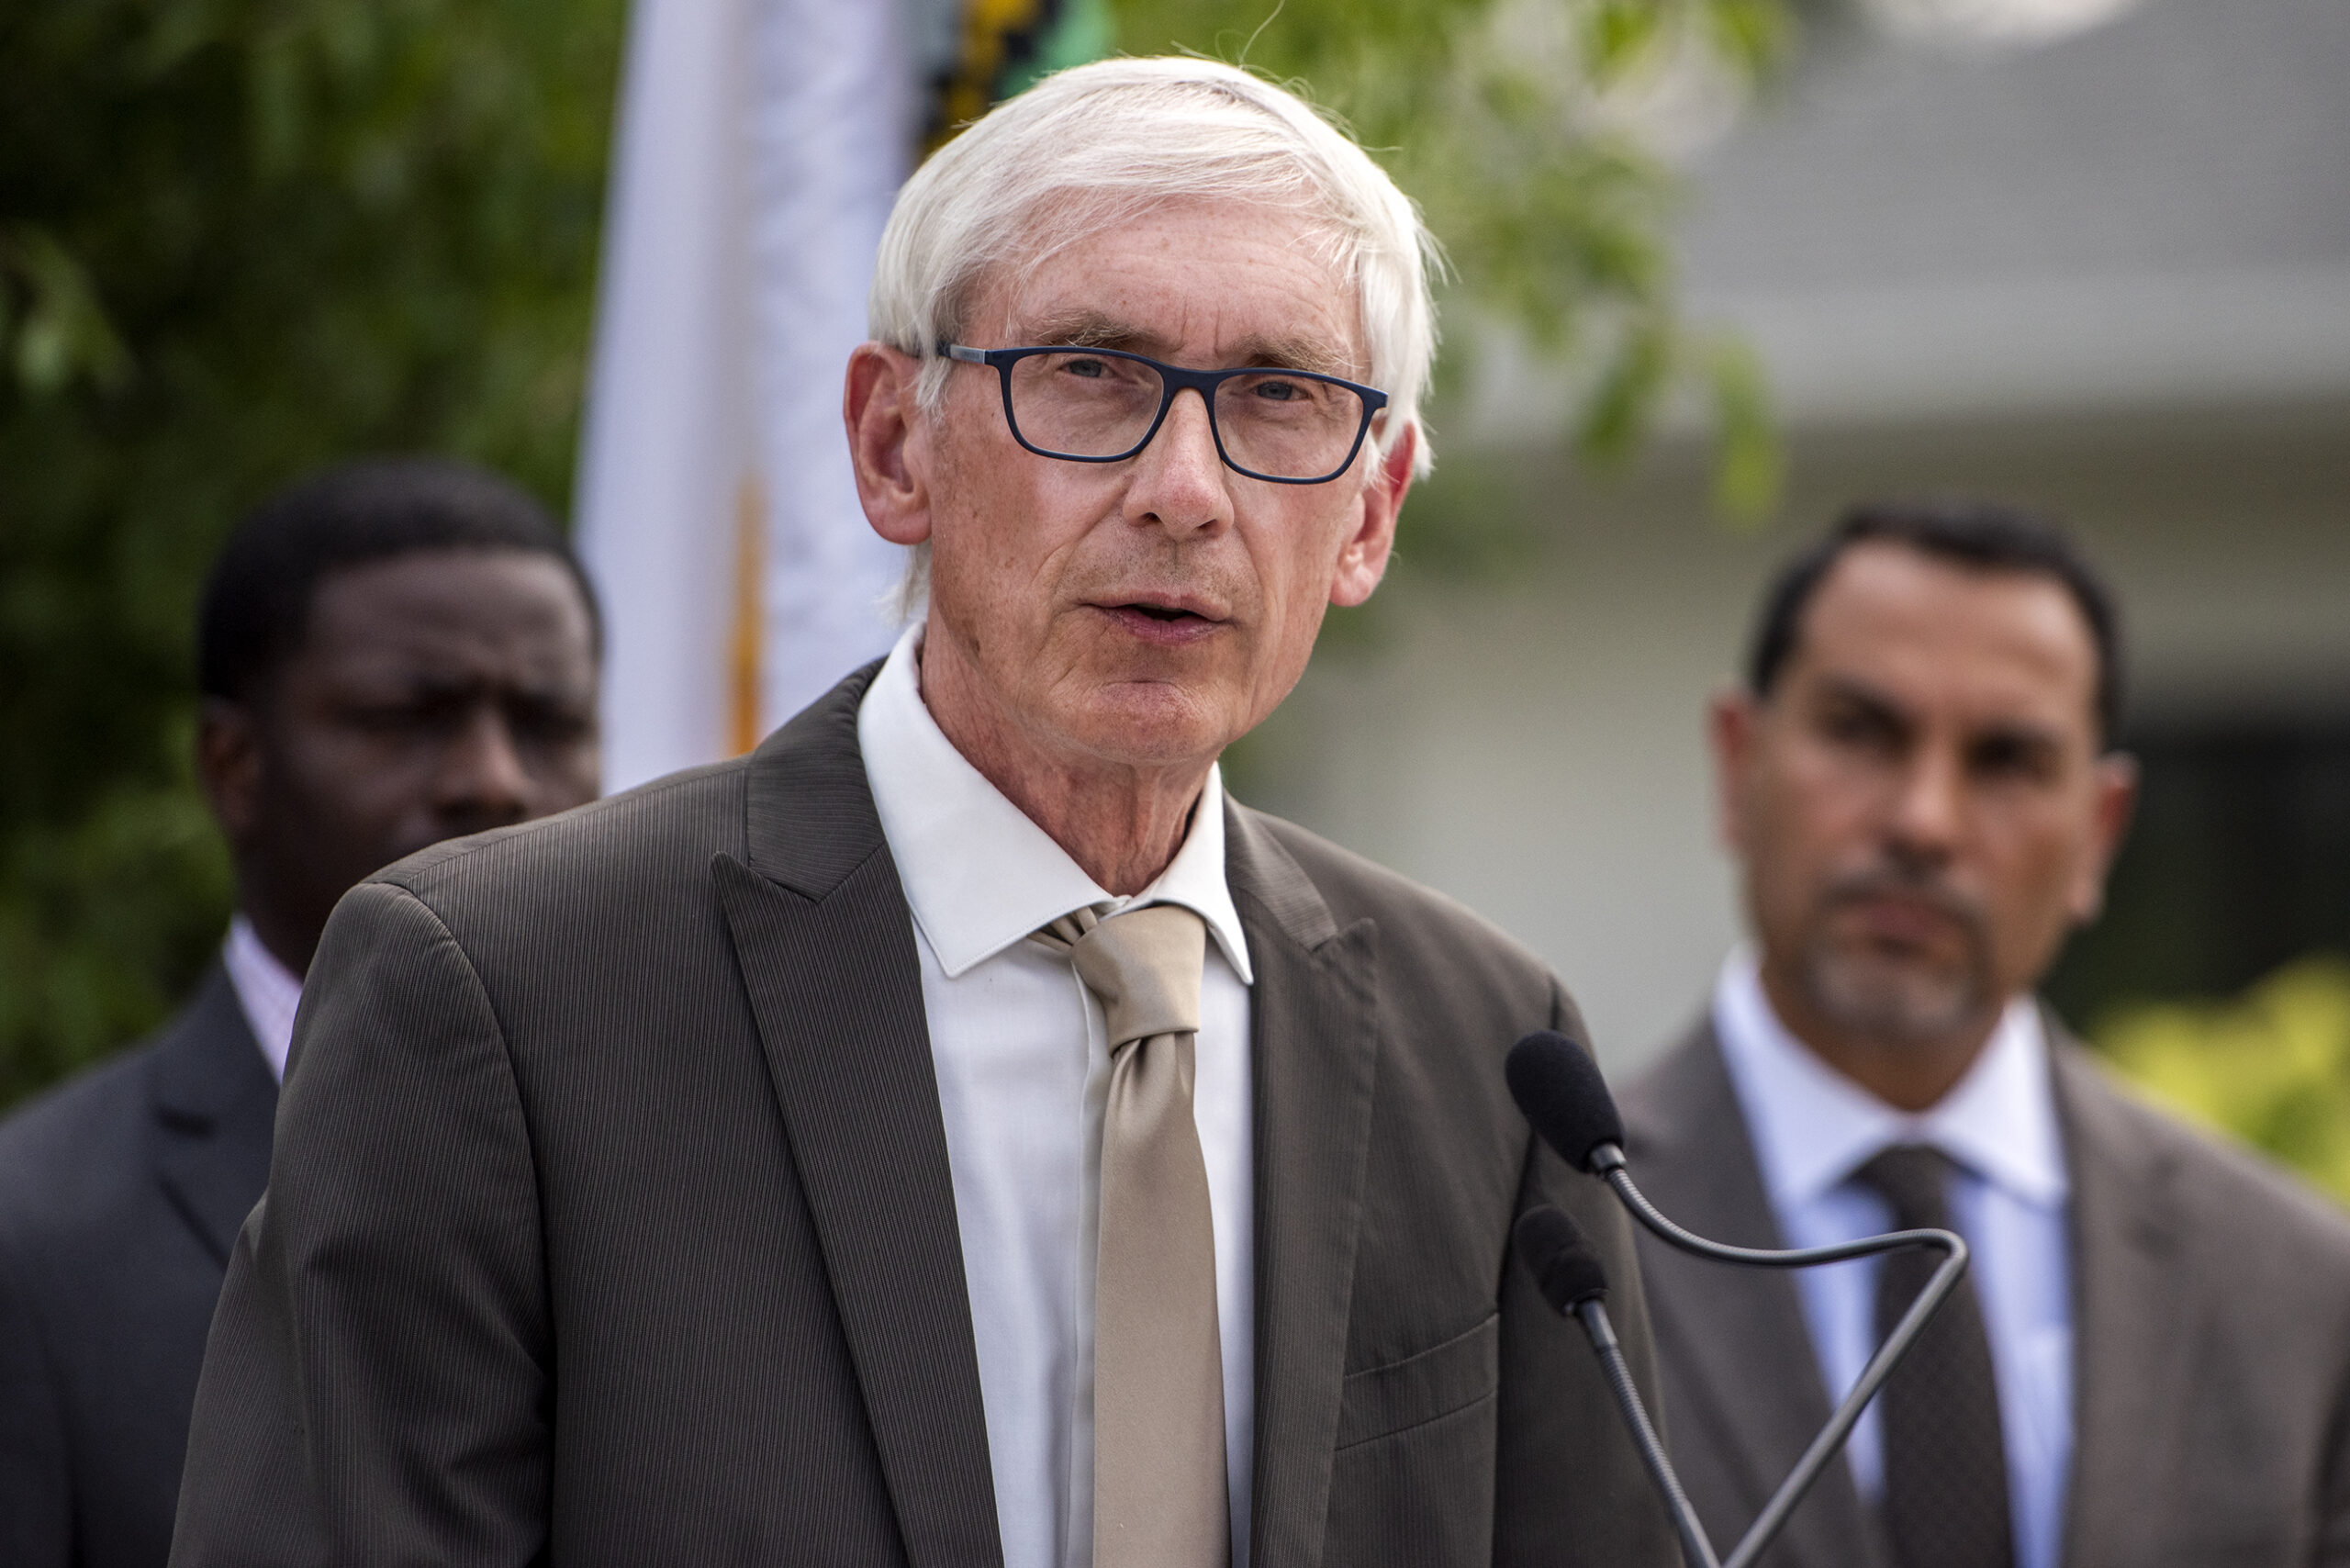 Gov. Tony Evers stands outside at a microphone during a press conference.